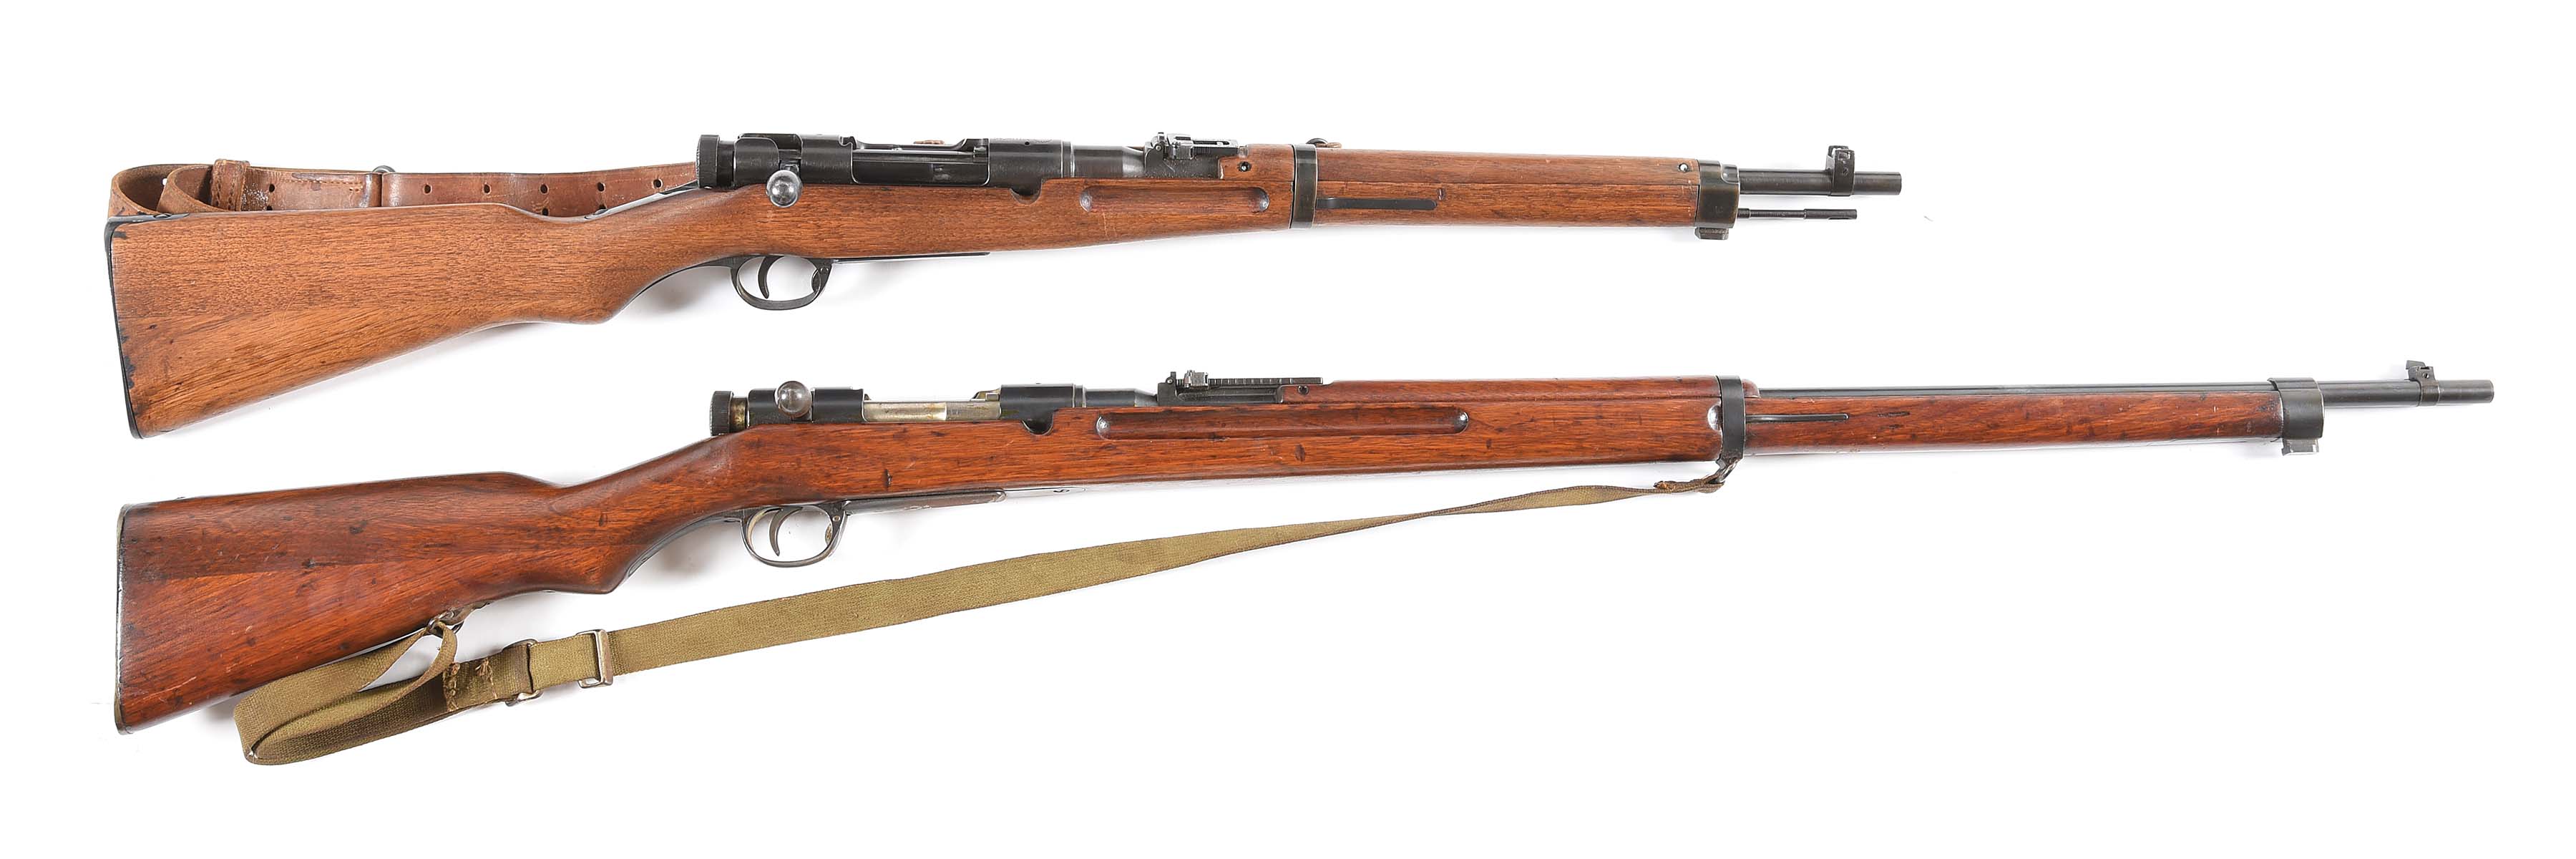 Japanese Arisaka Type 38 Carbine Auctions And Price Archive